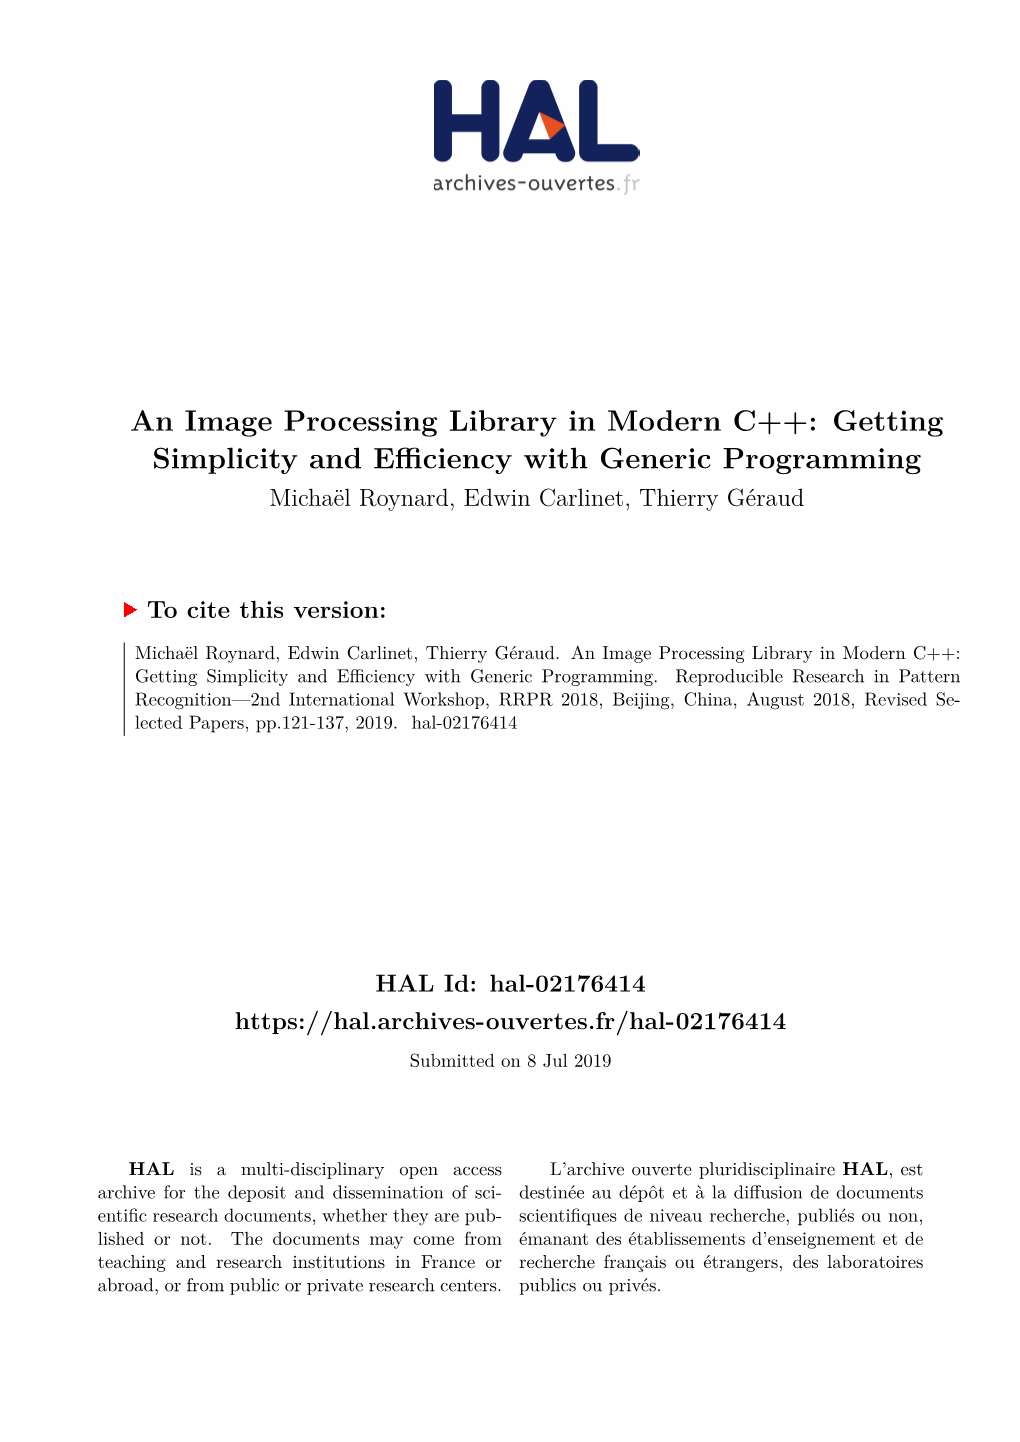 An Image Processing Library in Modern C++: Getting Simplicity and Eﬀiciency with Generic Programming Michaël Roynard, Edwin Carlinet, Thierry Géraud